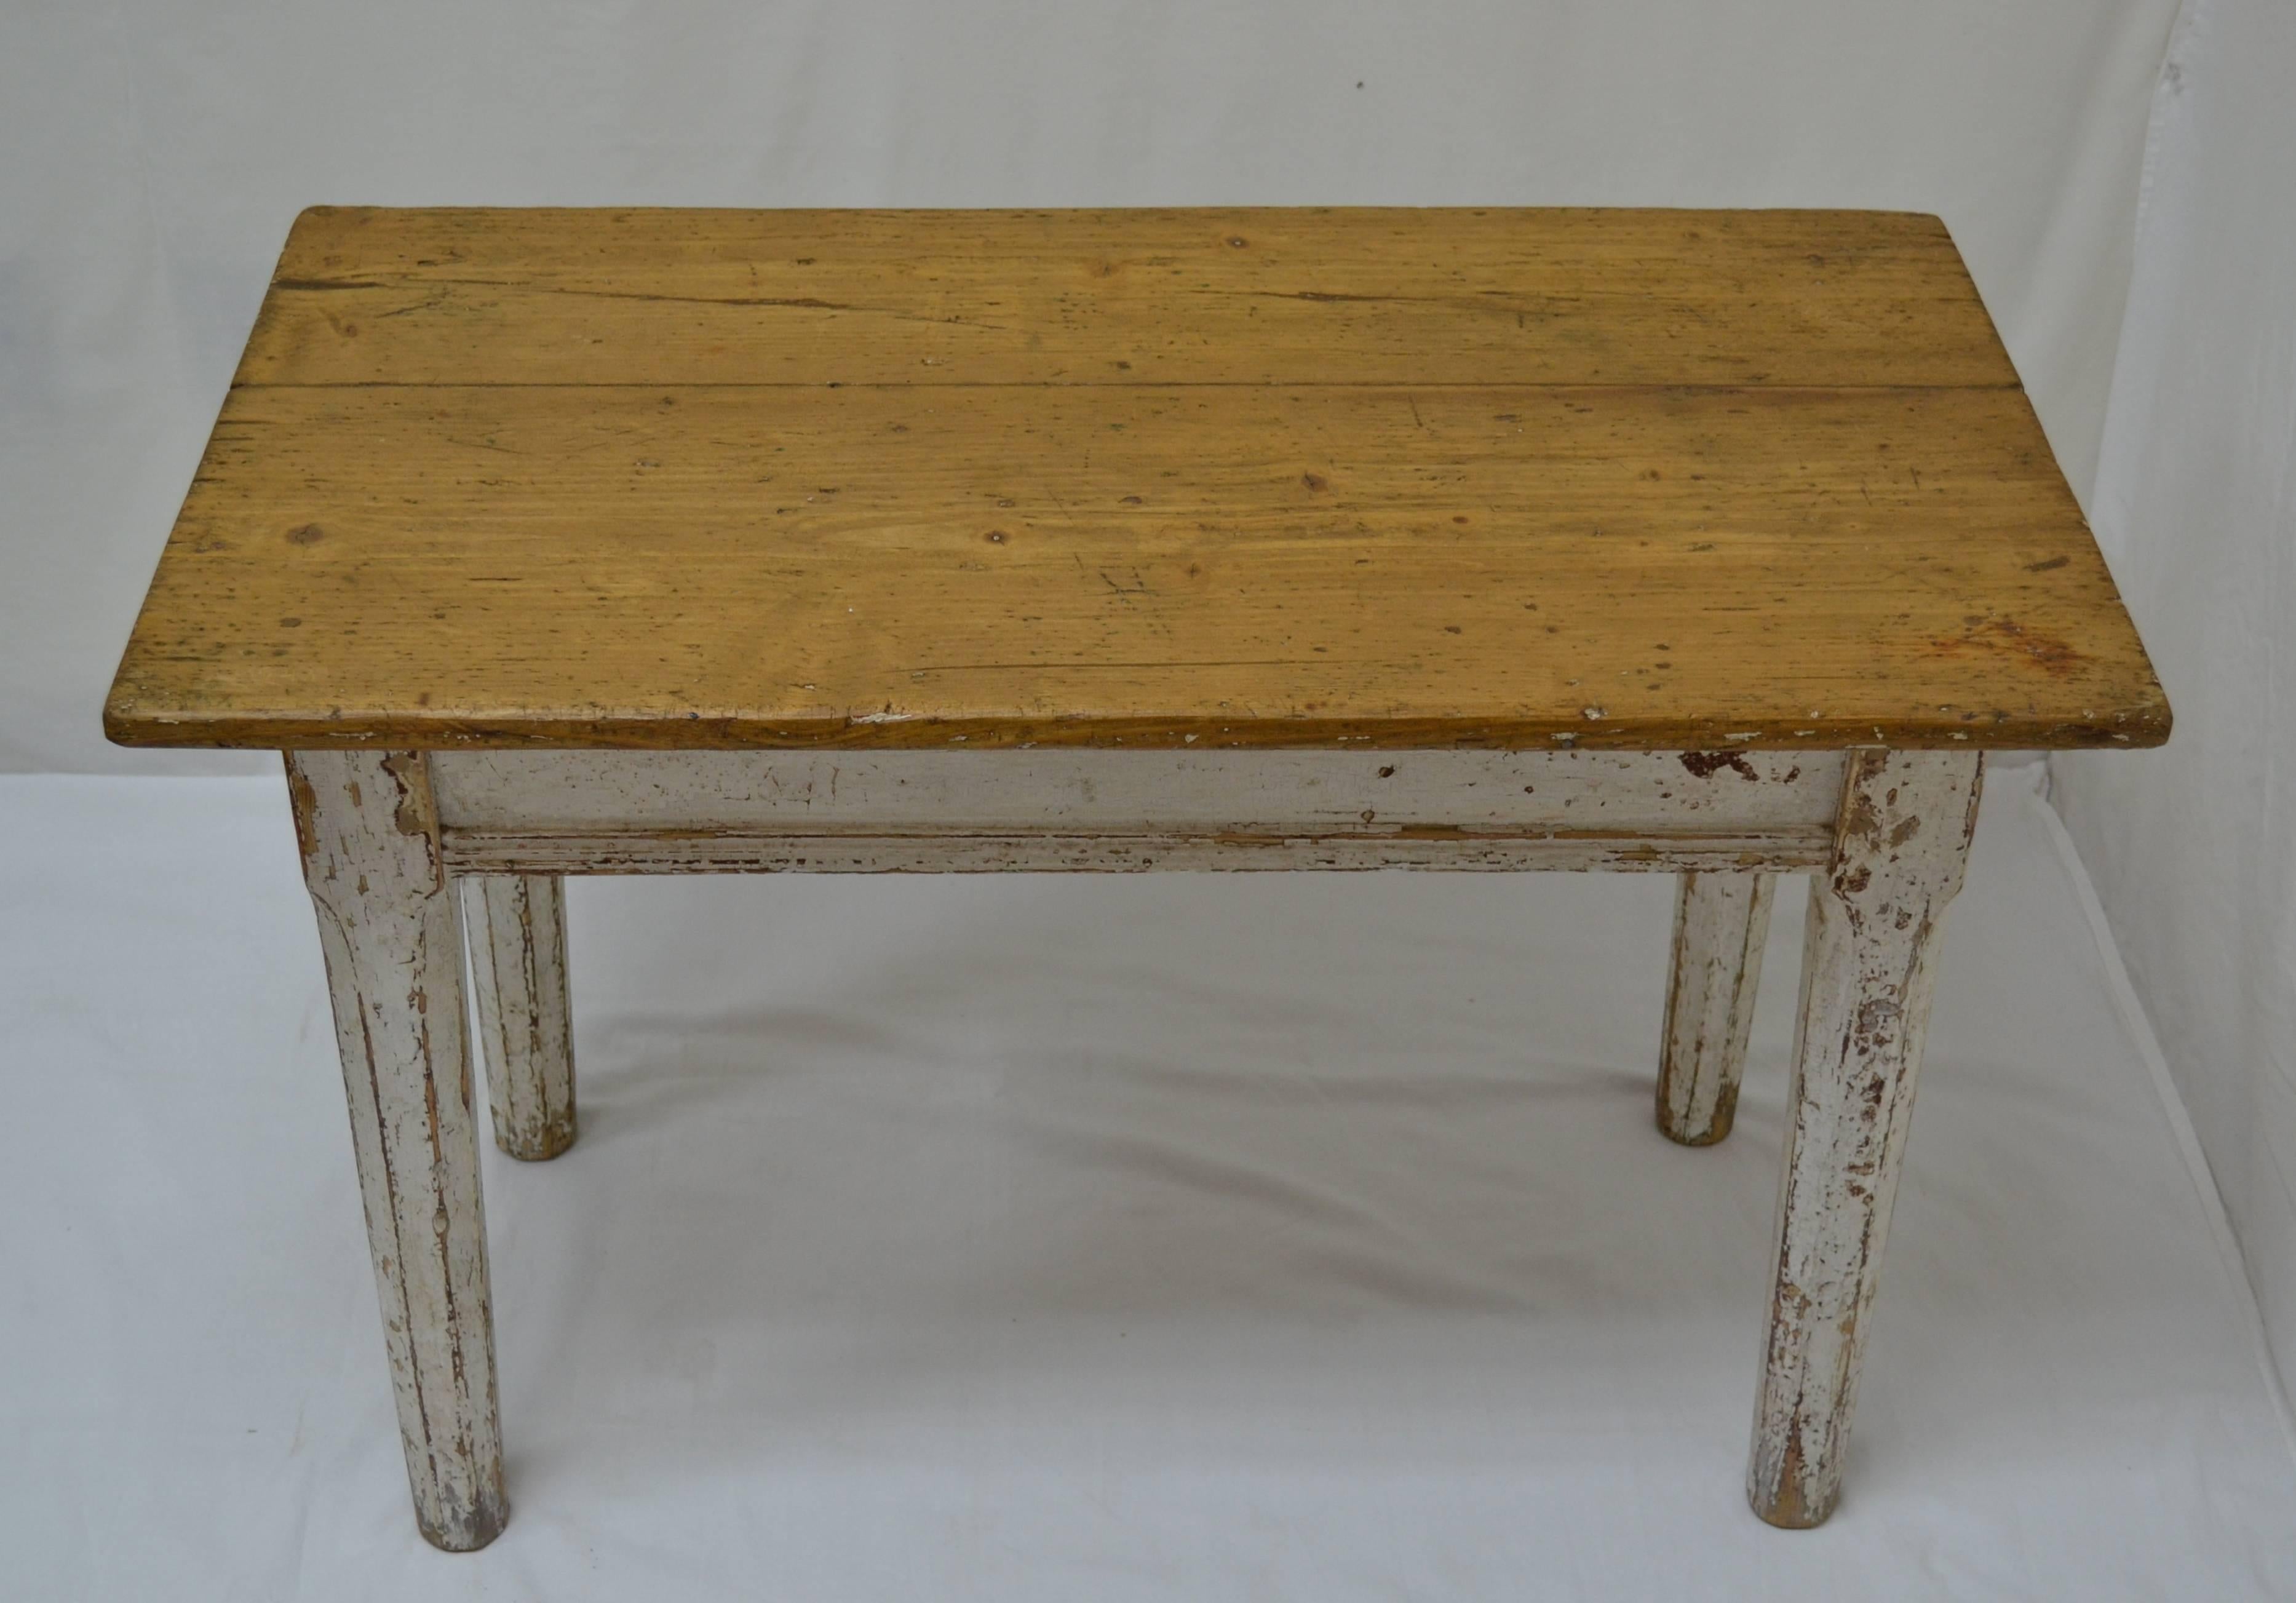 This is an attractive and very well made pine end table with a pretty two board top. The aprons feature horizontal applied reeding and are mortised into a most unusual leg. Beneath the square top block the leg is rounded and then chamfered into an